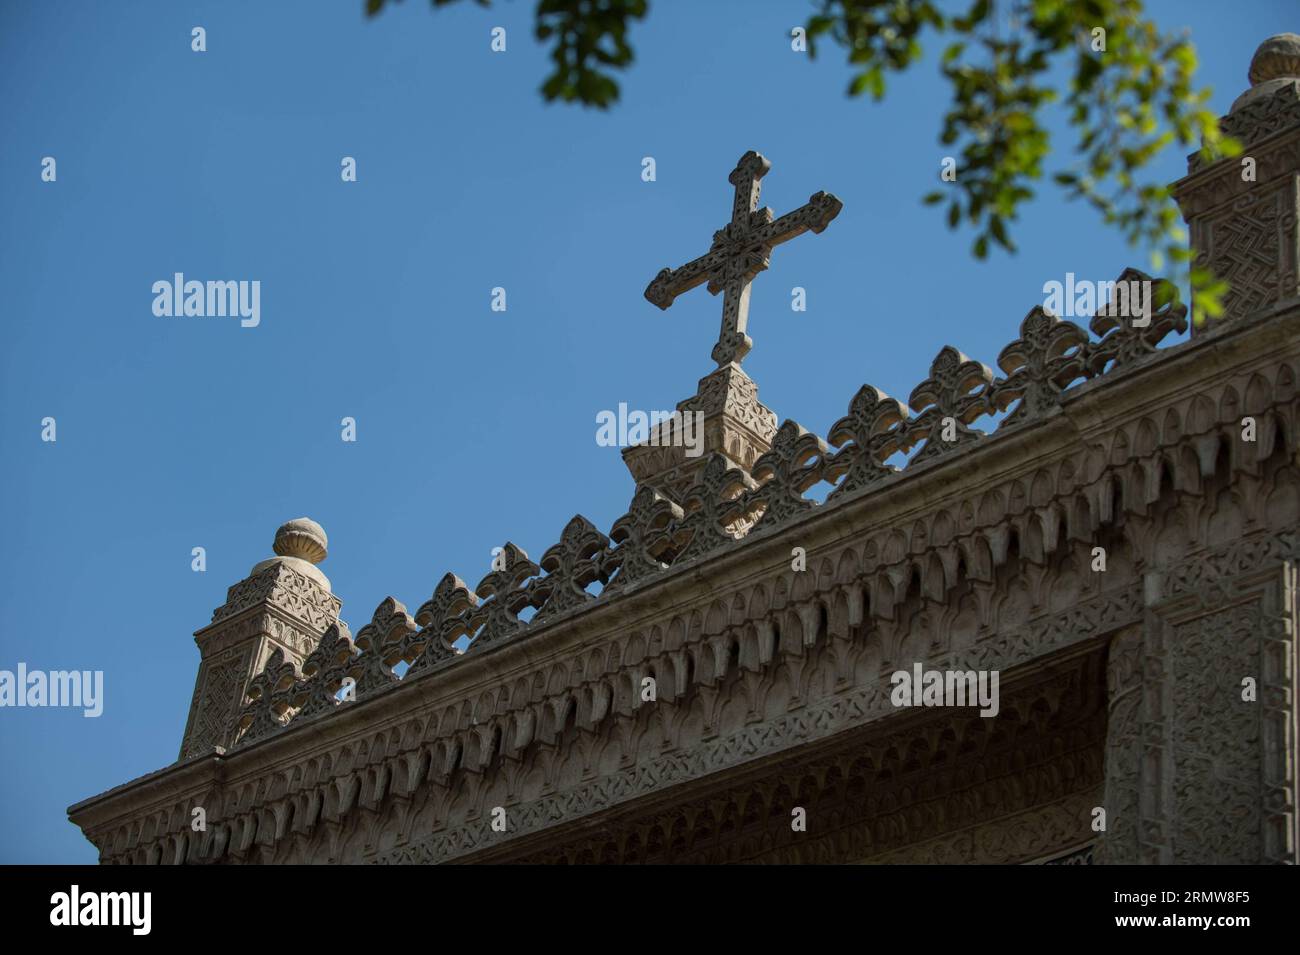 A cross is seen atop the hanging Coptic church in Cairo, Egypt, Oct. 11, 2014. The centuries-old church was reopened on Oct. 11 after 16 years of renovation. ) EGYPT-CAIRO-RELIGION-COPTIC CHURCH PanxChaoyue PUBLICATIONxNOTxINxCHN   a Cross IS Lakes atop The Hanging Coptic Church in Cairo Egypt OCT 11 2014 The centuries Old Church what reopened ON OCT 11 After 16 Years of Renovation Egypt Cairo Religion Coptic Church  PUBLICATIONxNOTxINxCHN Stock Photo